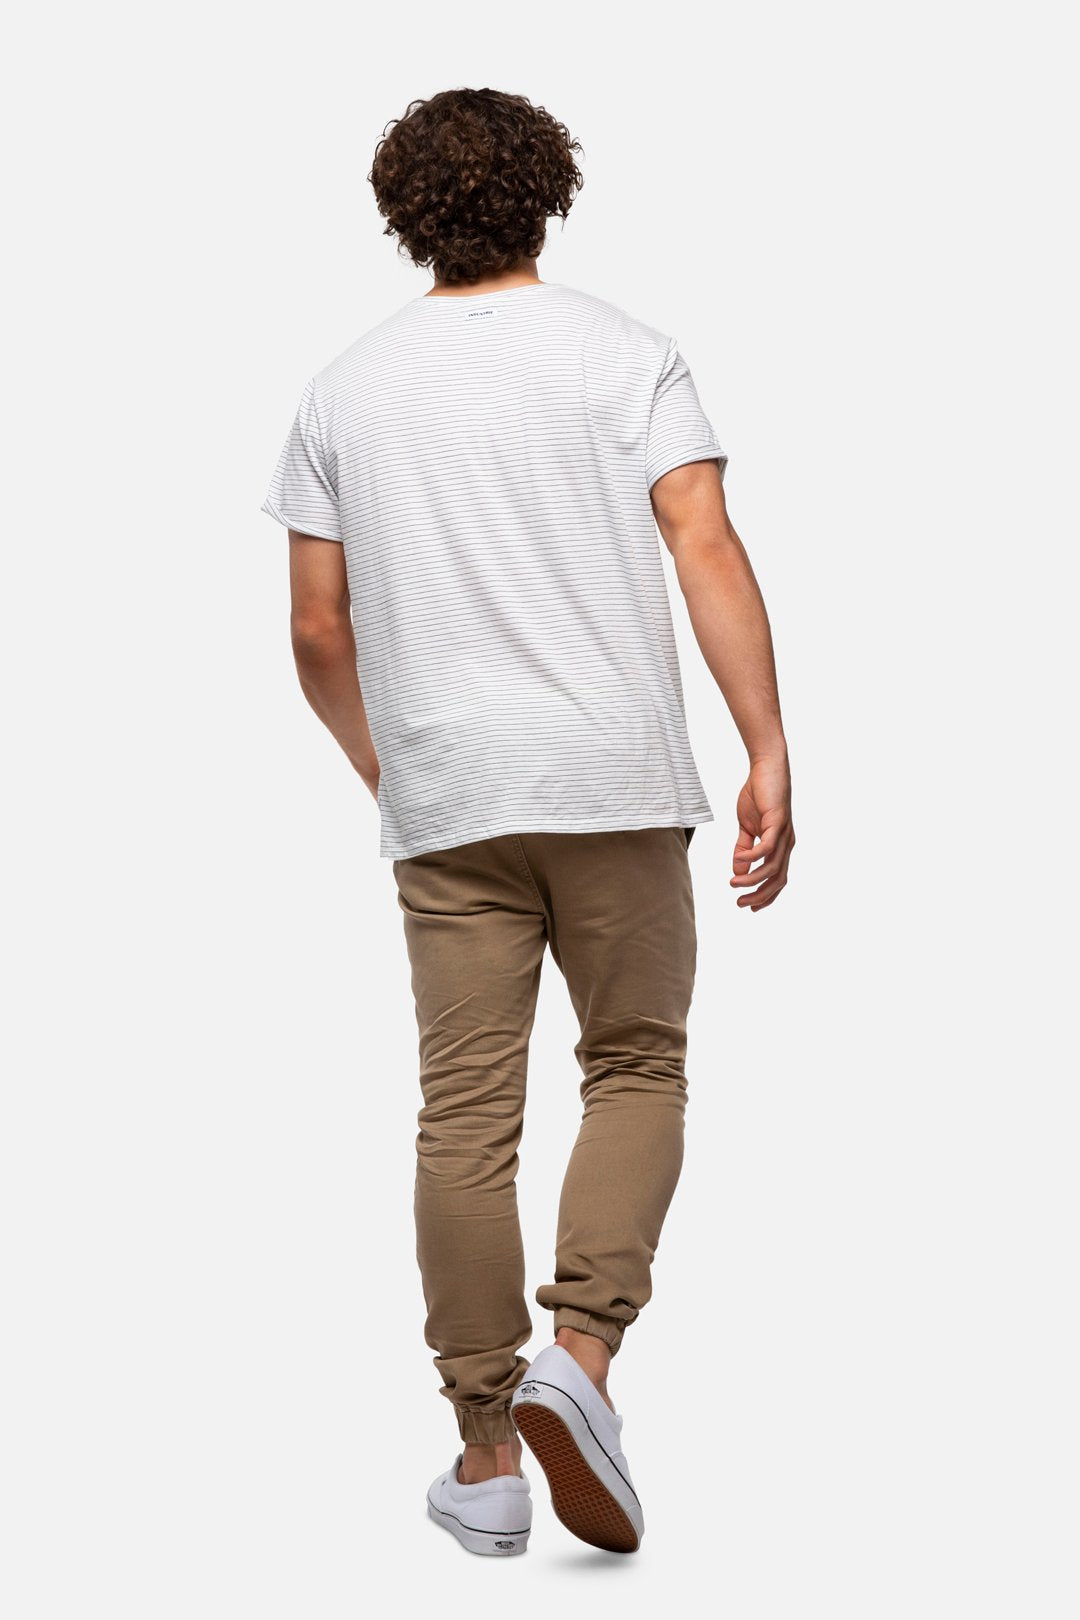 INDUSTRIE - The Drifter Chino Pant - NEW CINNAMON